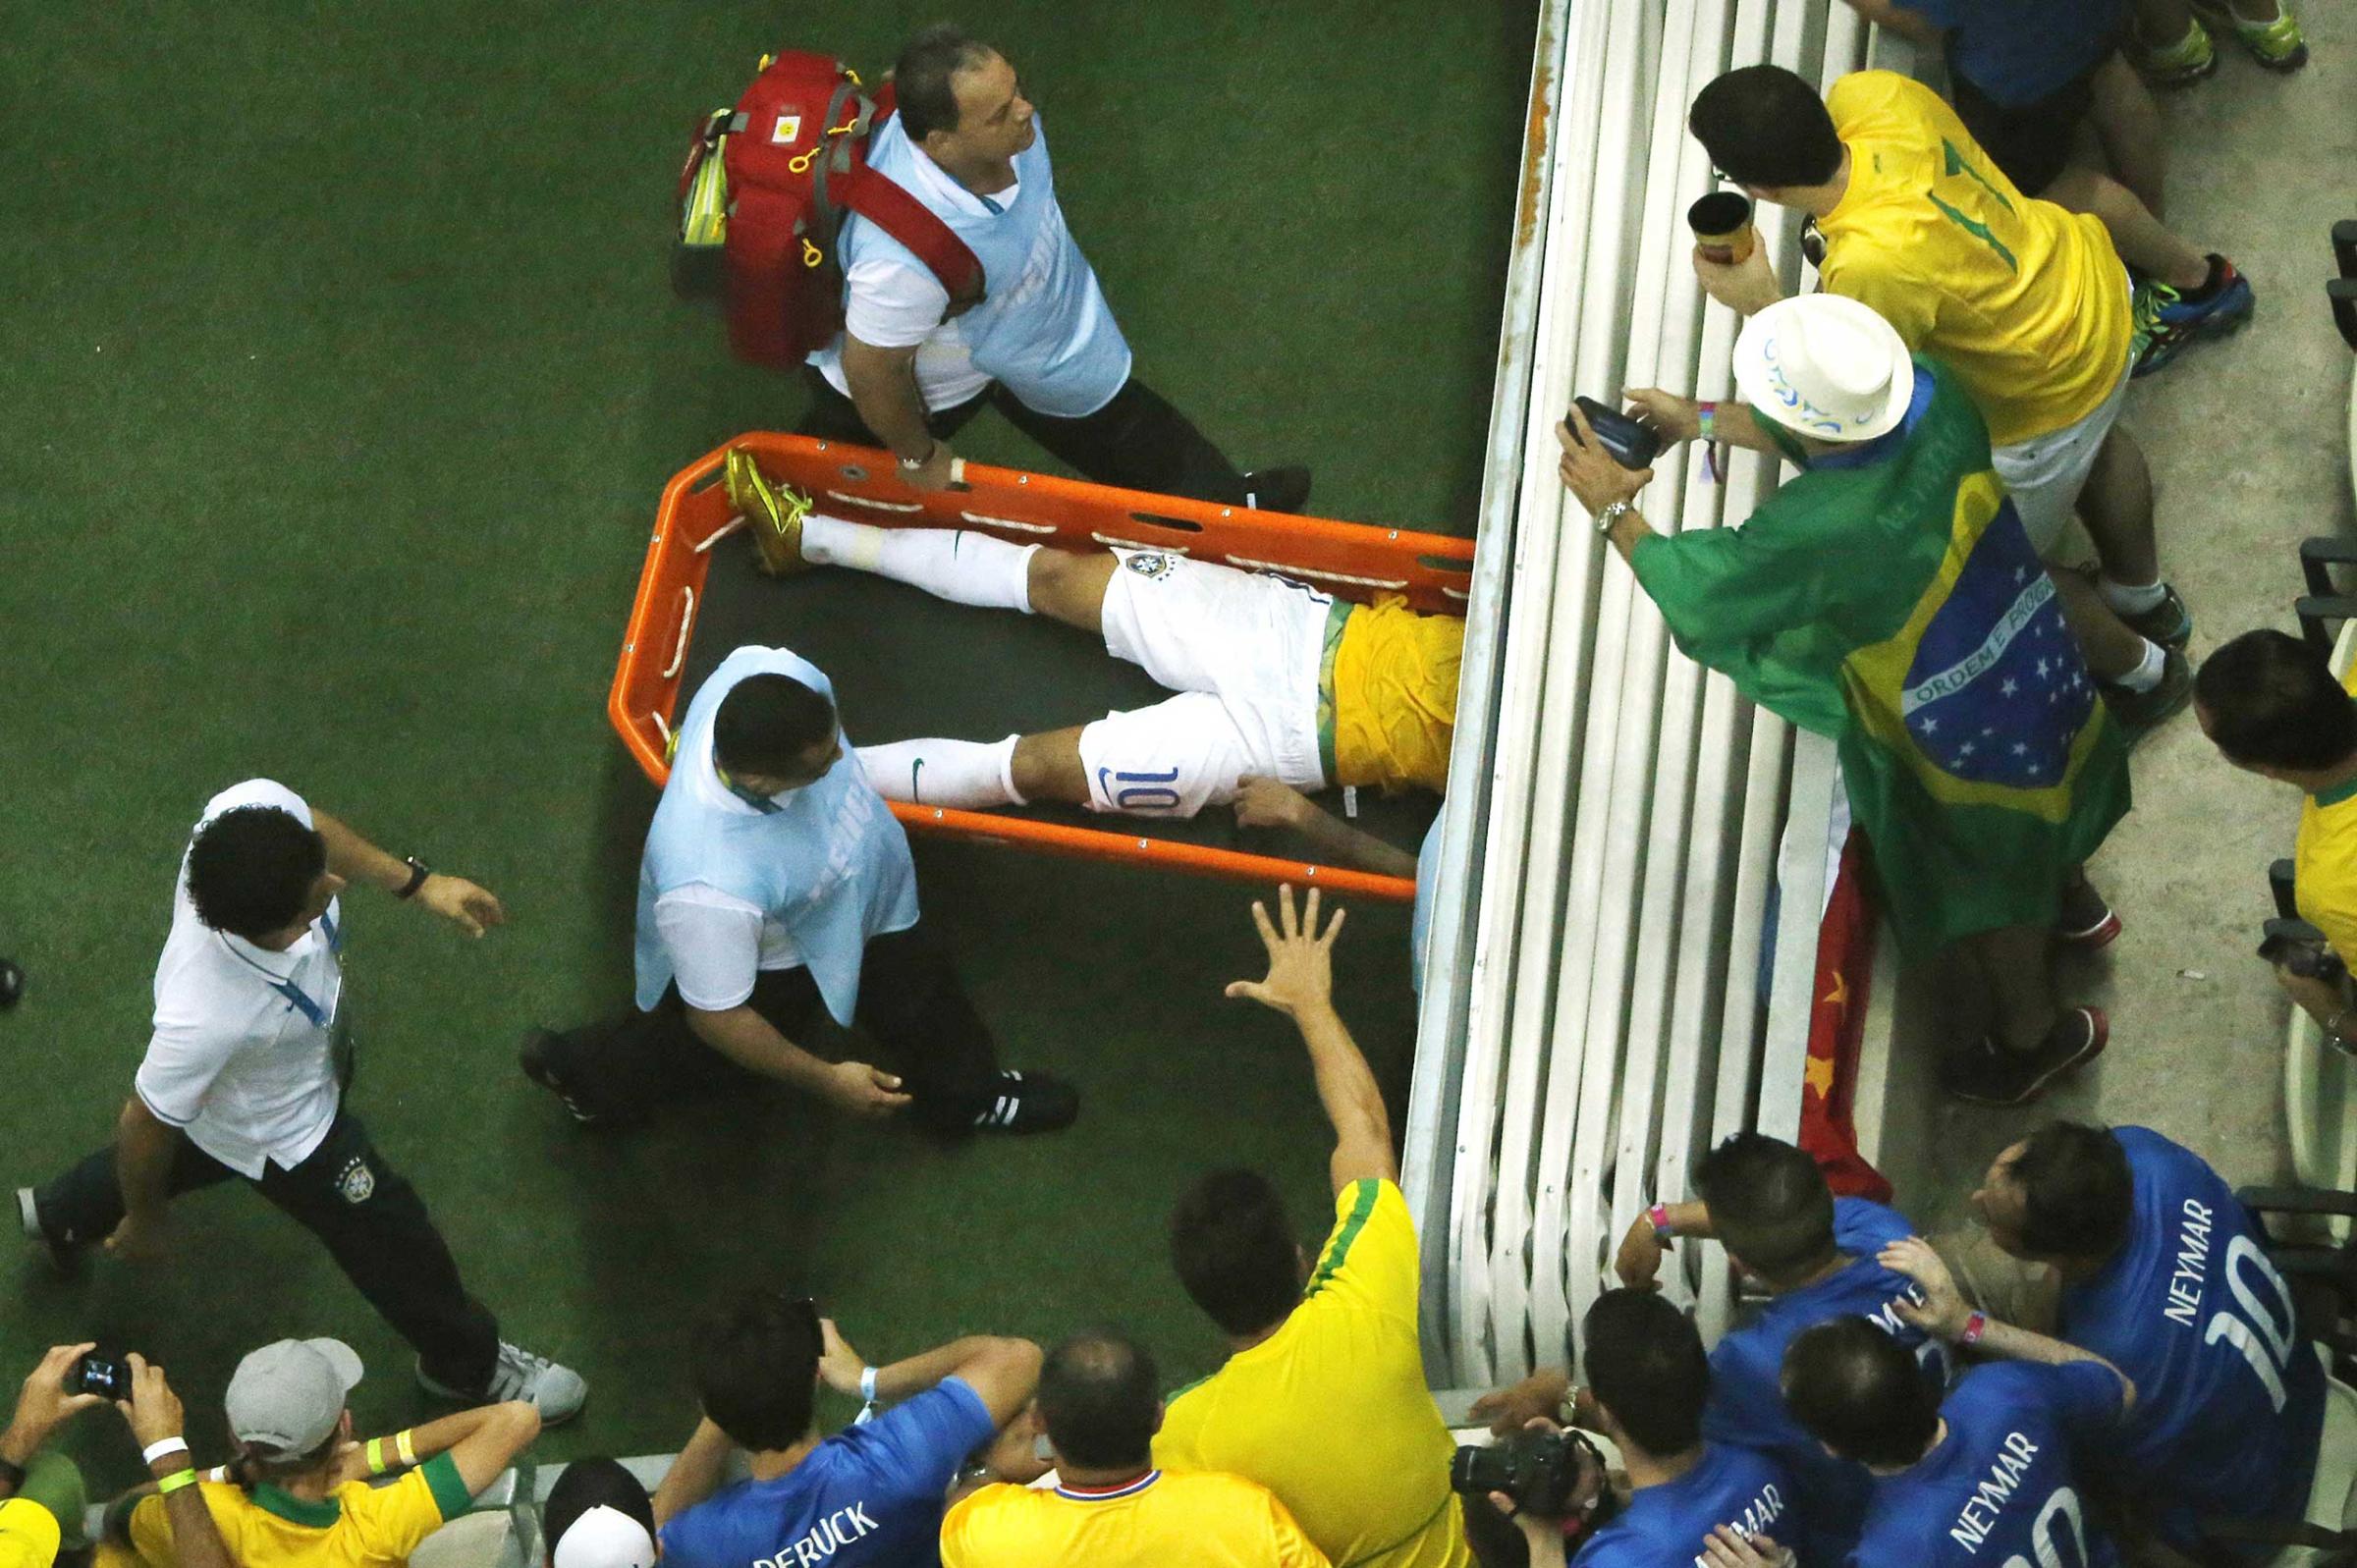 Fans react as Brazil's forward Neymar is carried off the pitch on a stretcher after being injured during the quarter-final football match between Brazil and Colombia at the Castelao Stadium in Fortaleza during the 2014 FIFA World Cup, July 4, 2014.